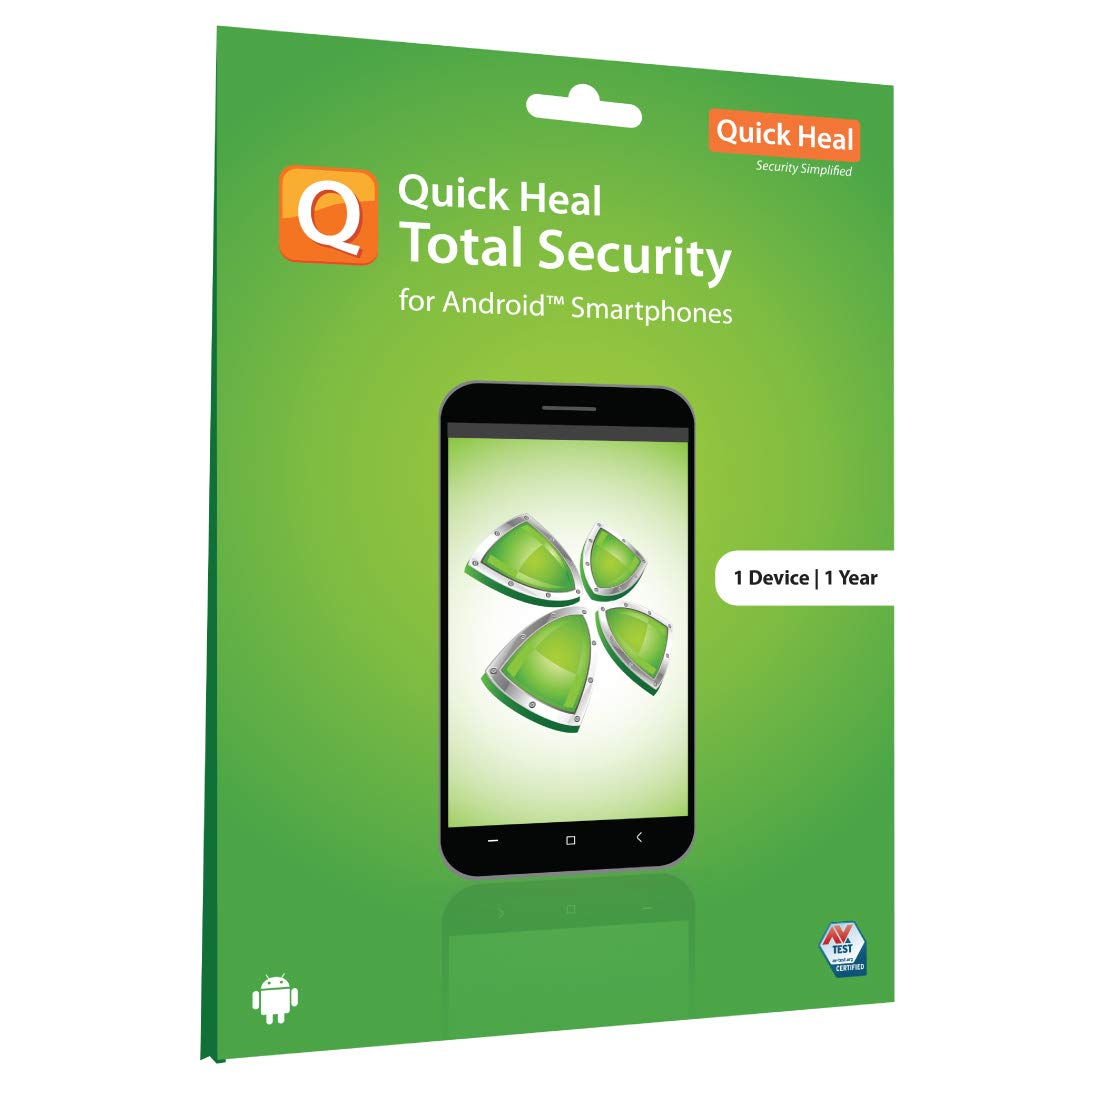 QUICK HEAL MOBILE SECURITY
1 USER 1 YEAR